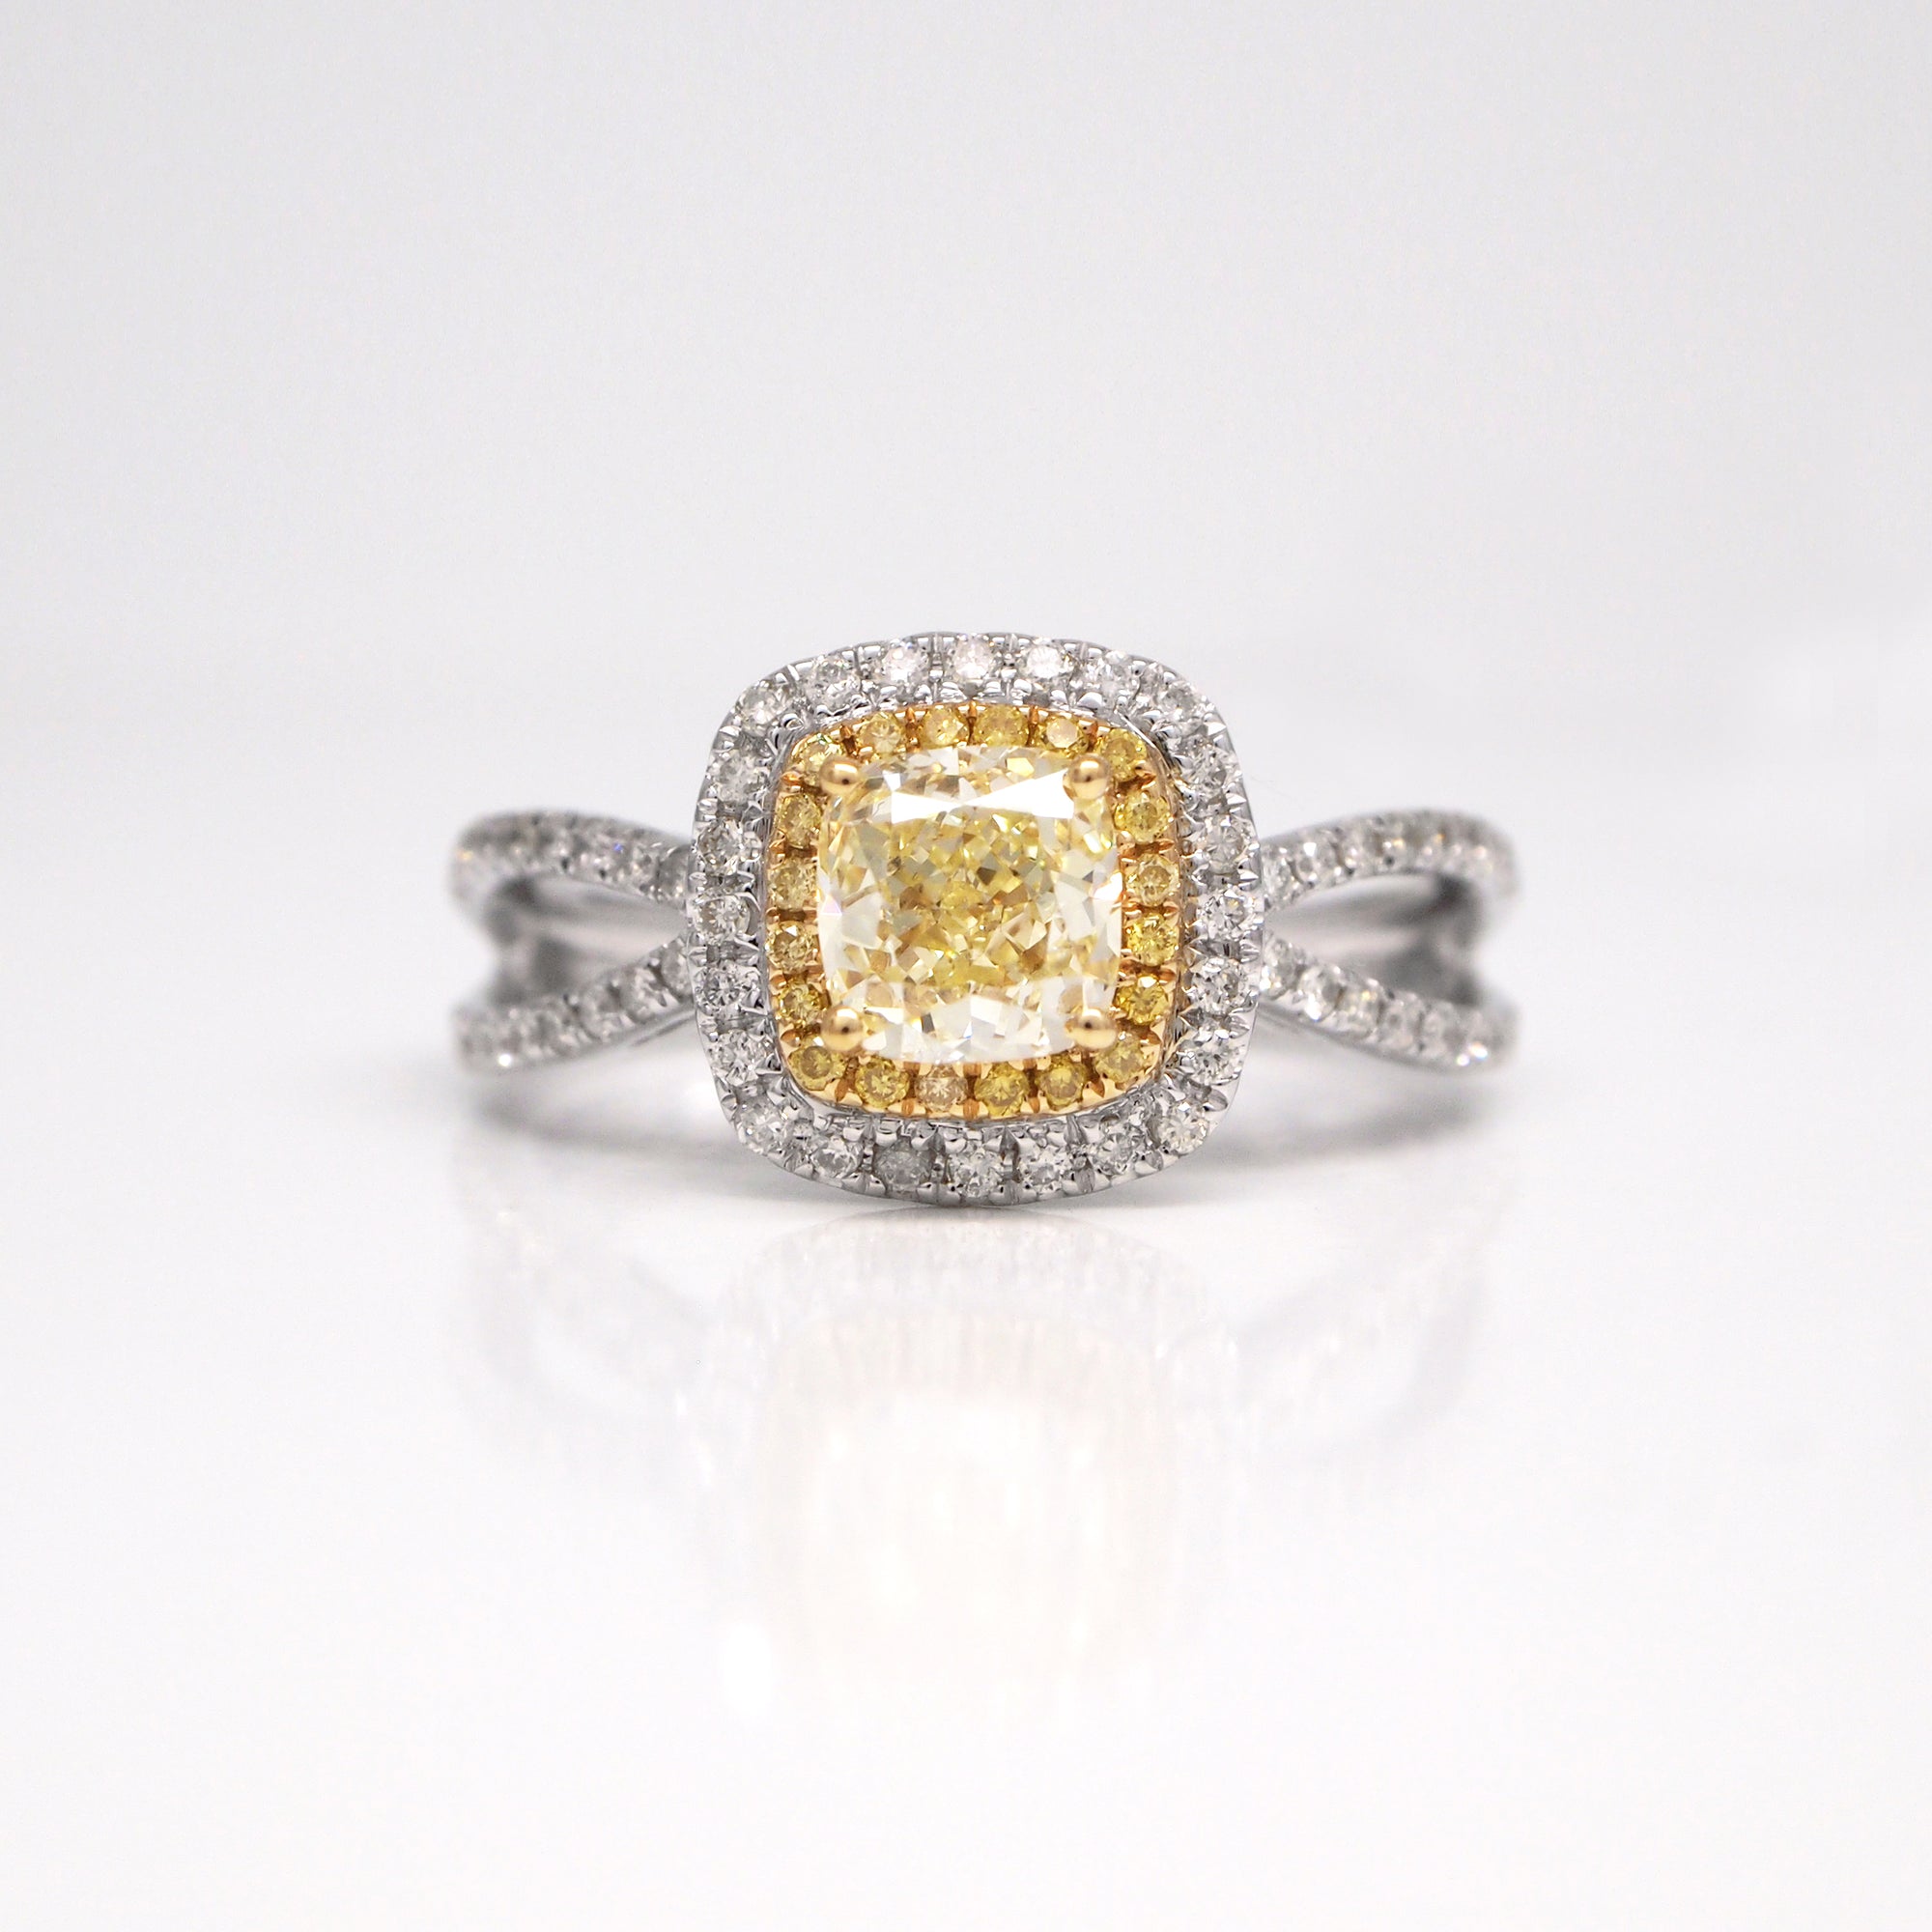 18K white gold split-shank yellow diamond engagement ring with GIA certificate 